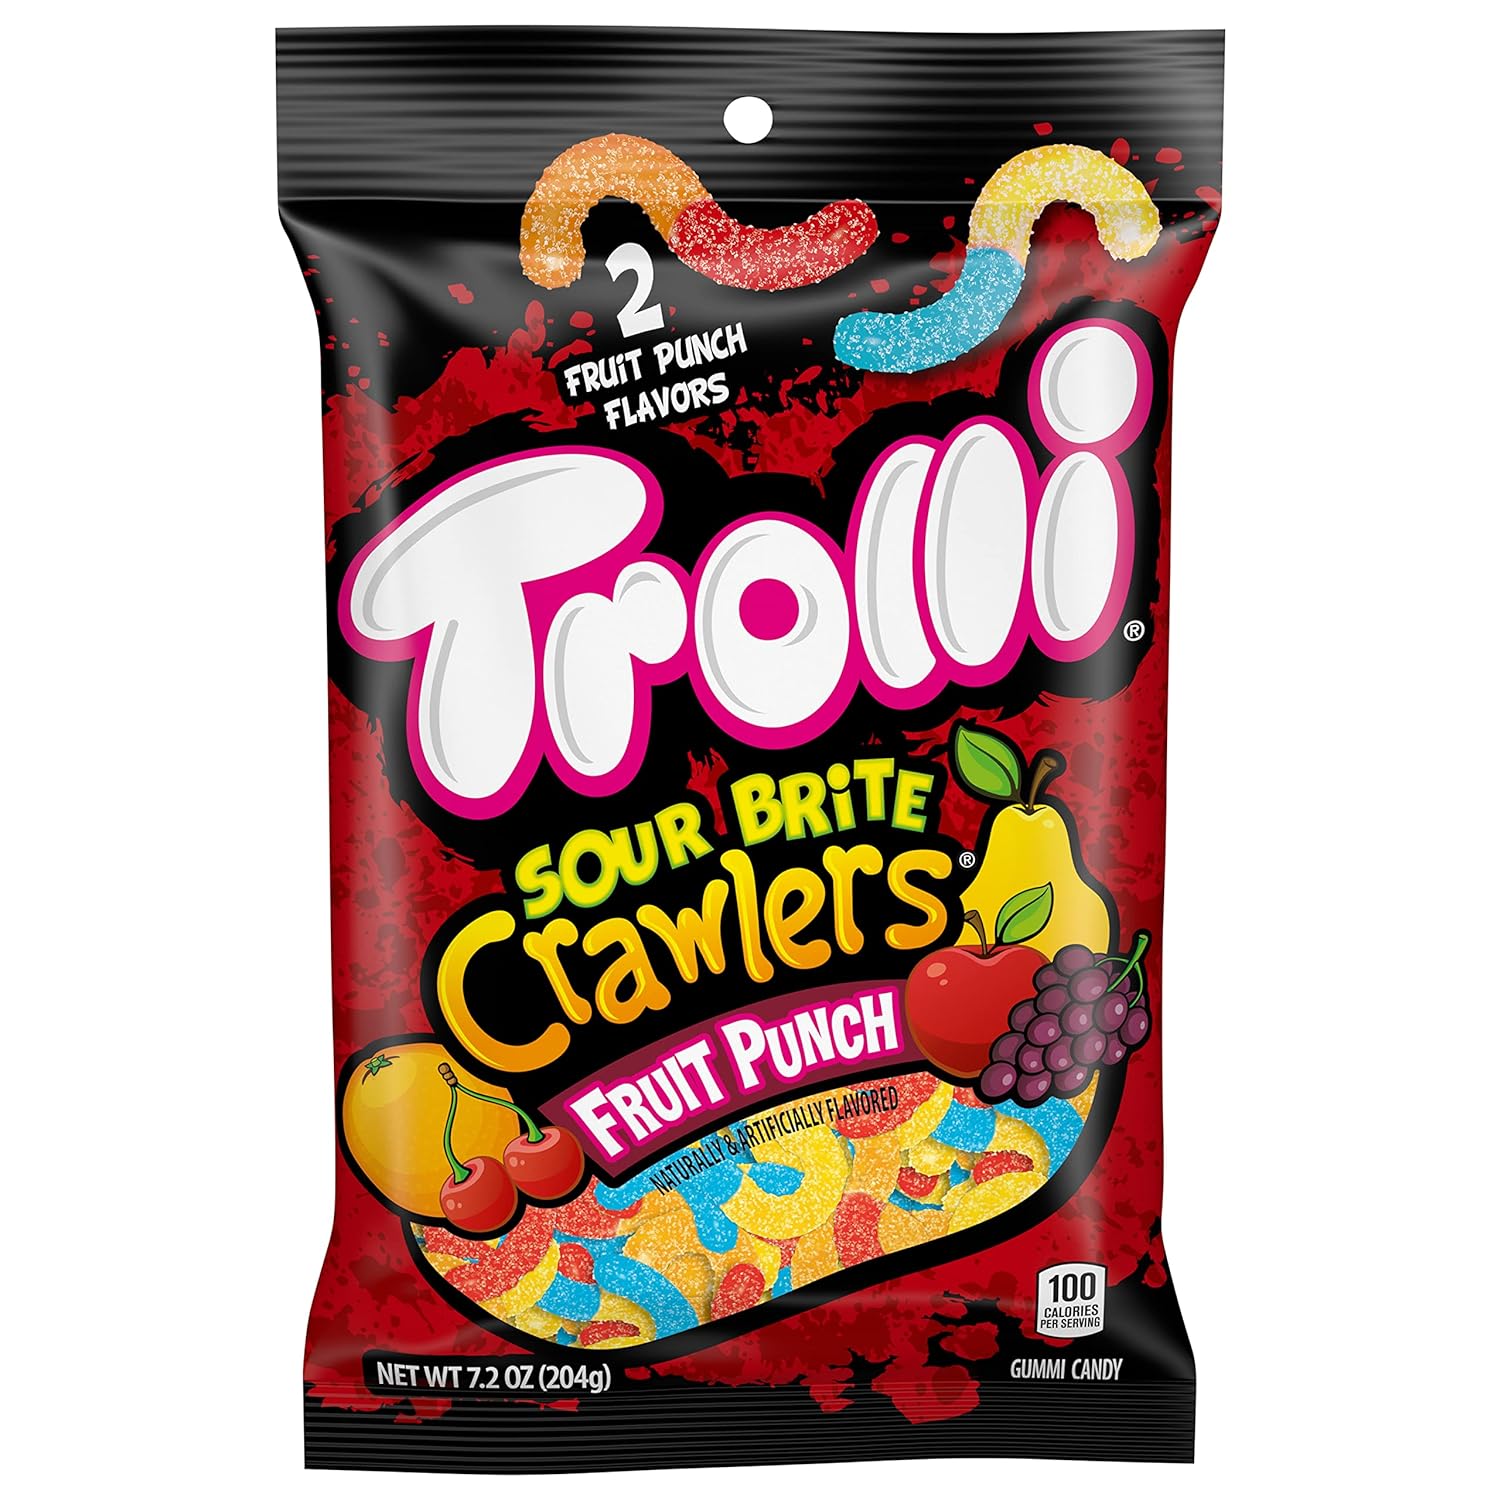 Trolli Sour Brite Crawlers Candy, Fruit Punch Flavored Sour Gummy Worms, 7.2 Ounce